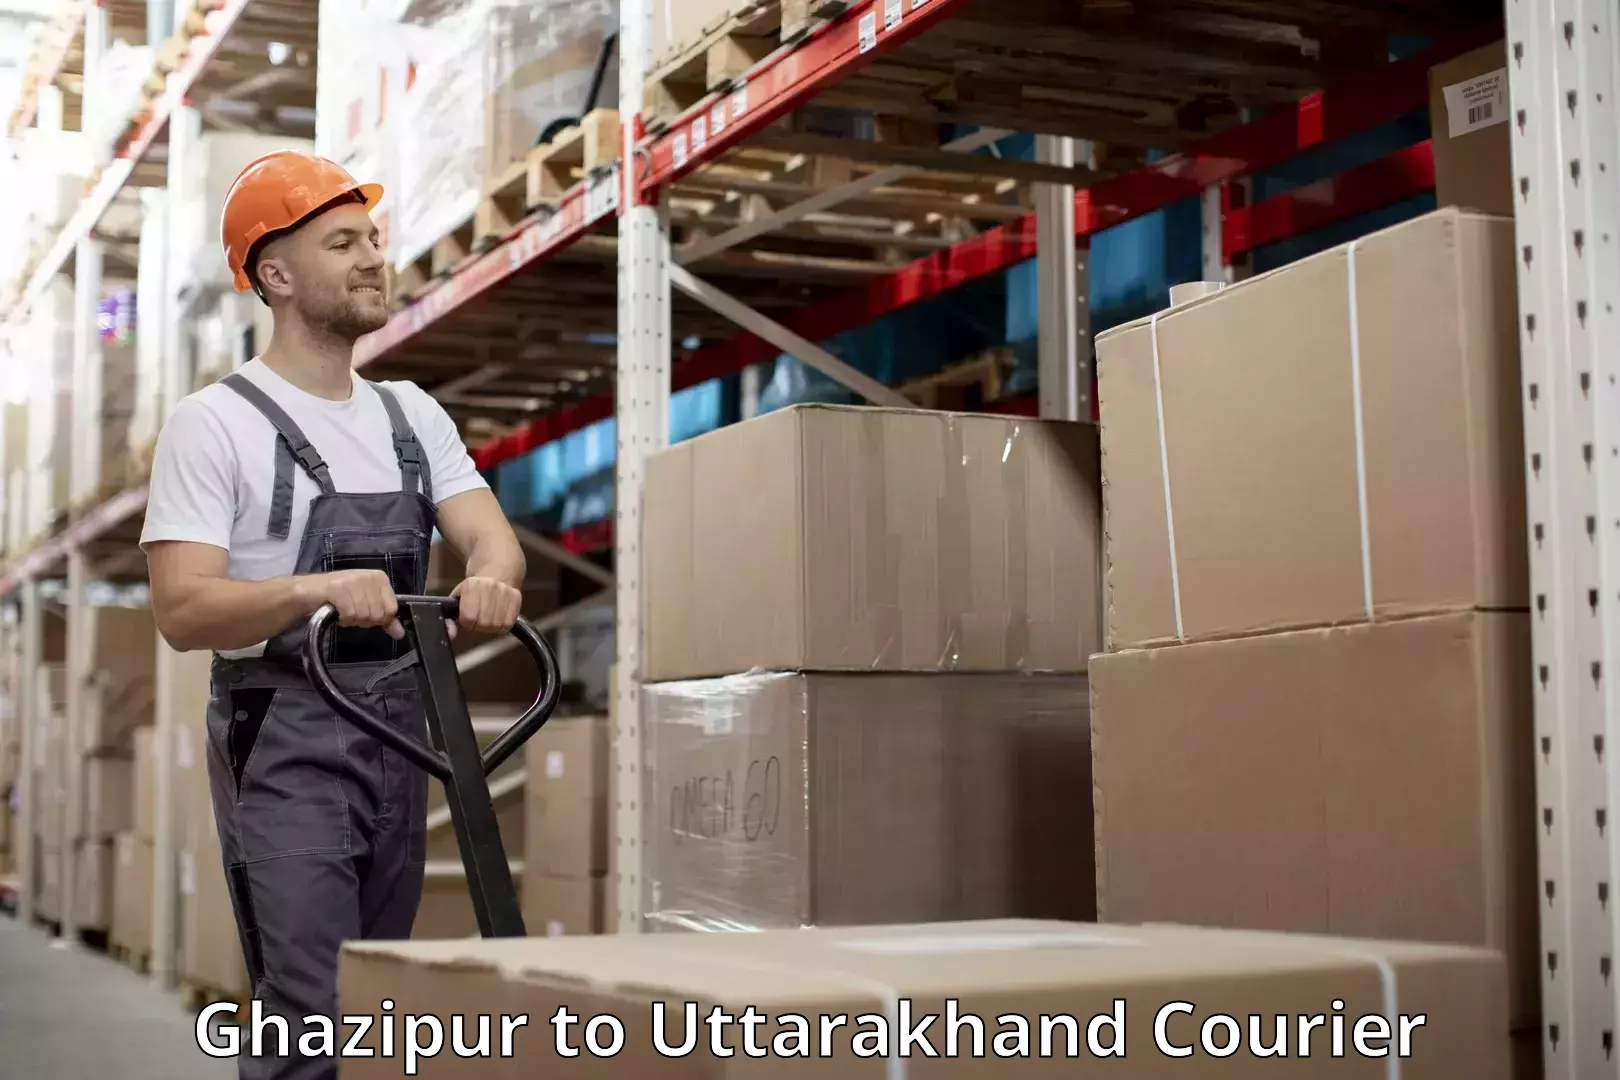 Baggage shipping experts Ghazipur to Uttarakhand